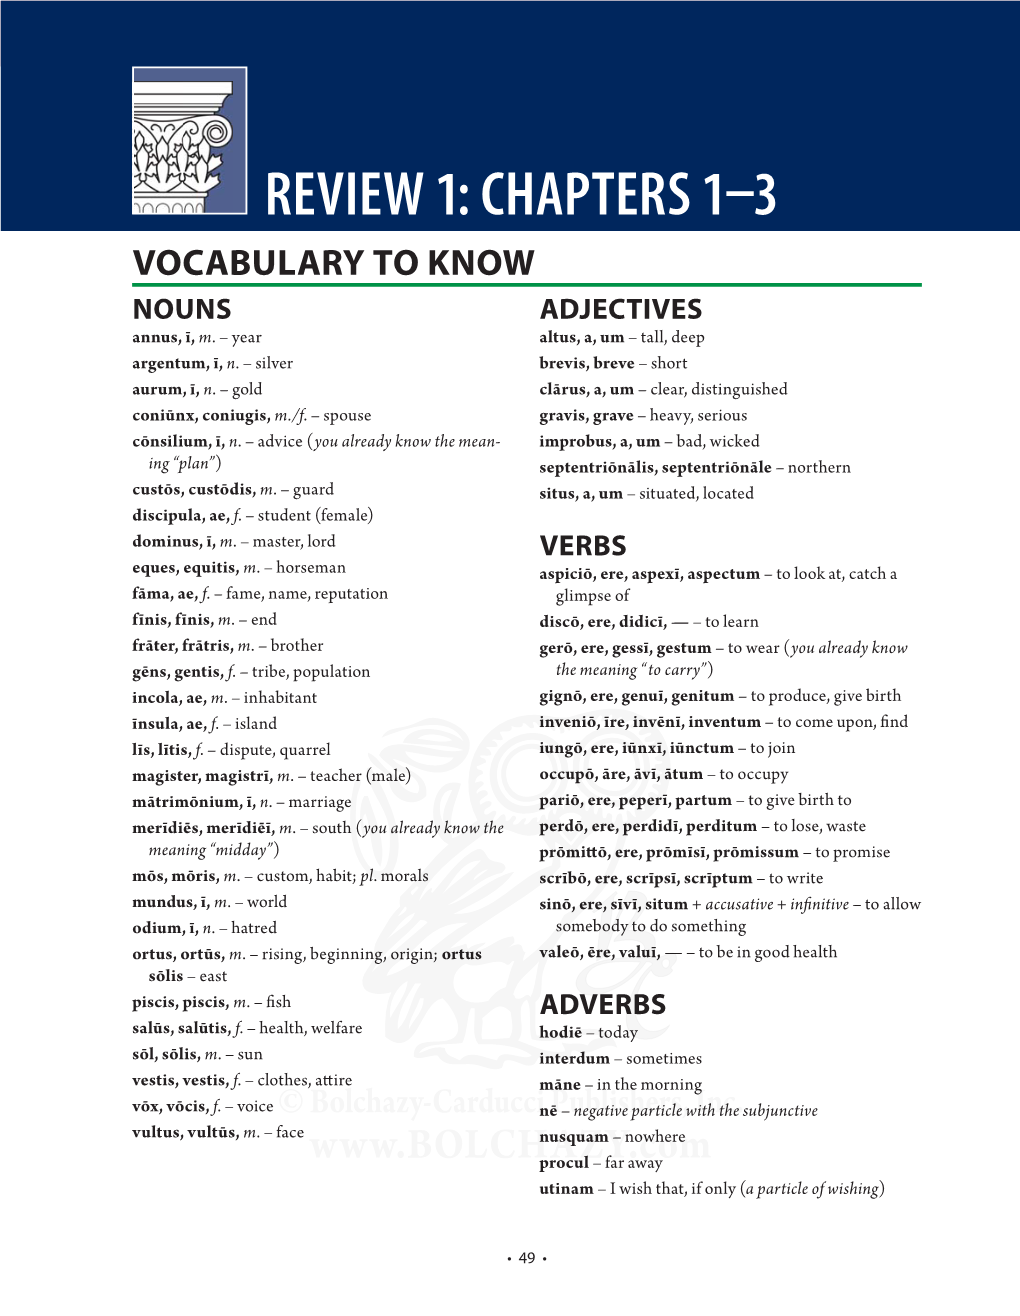 REVIEW 1: CHAPTERS 1–3 VOCABULARY to KNOW NOUNS ADJECTIVES Annus, Ī, M